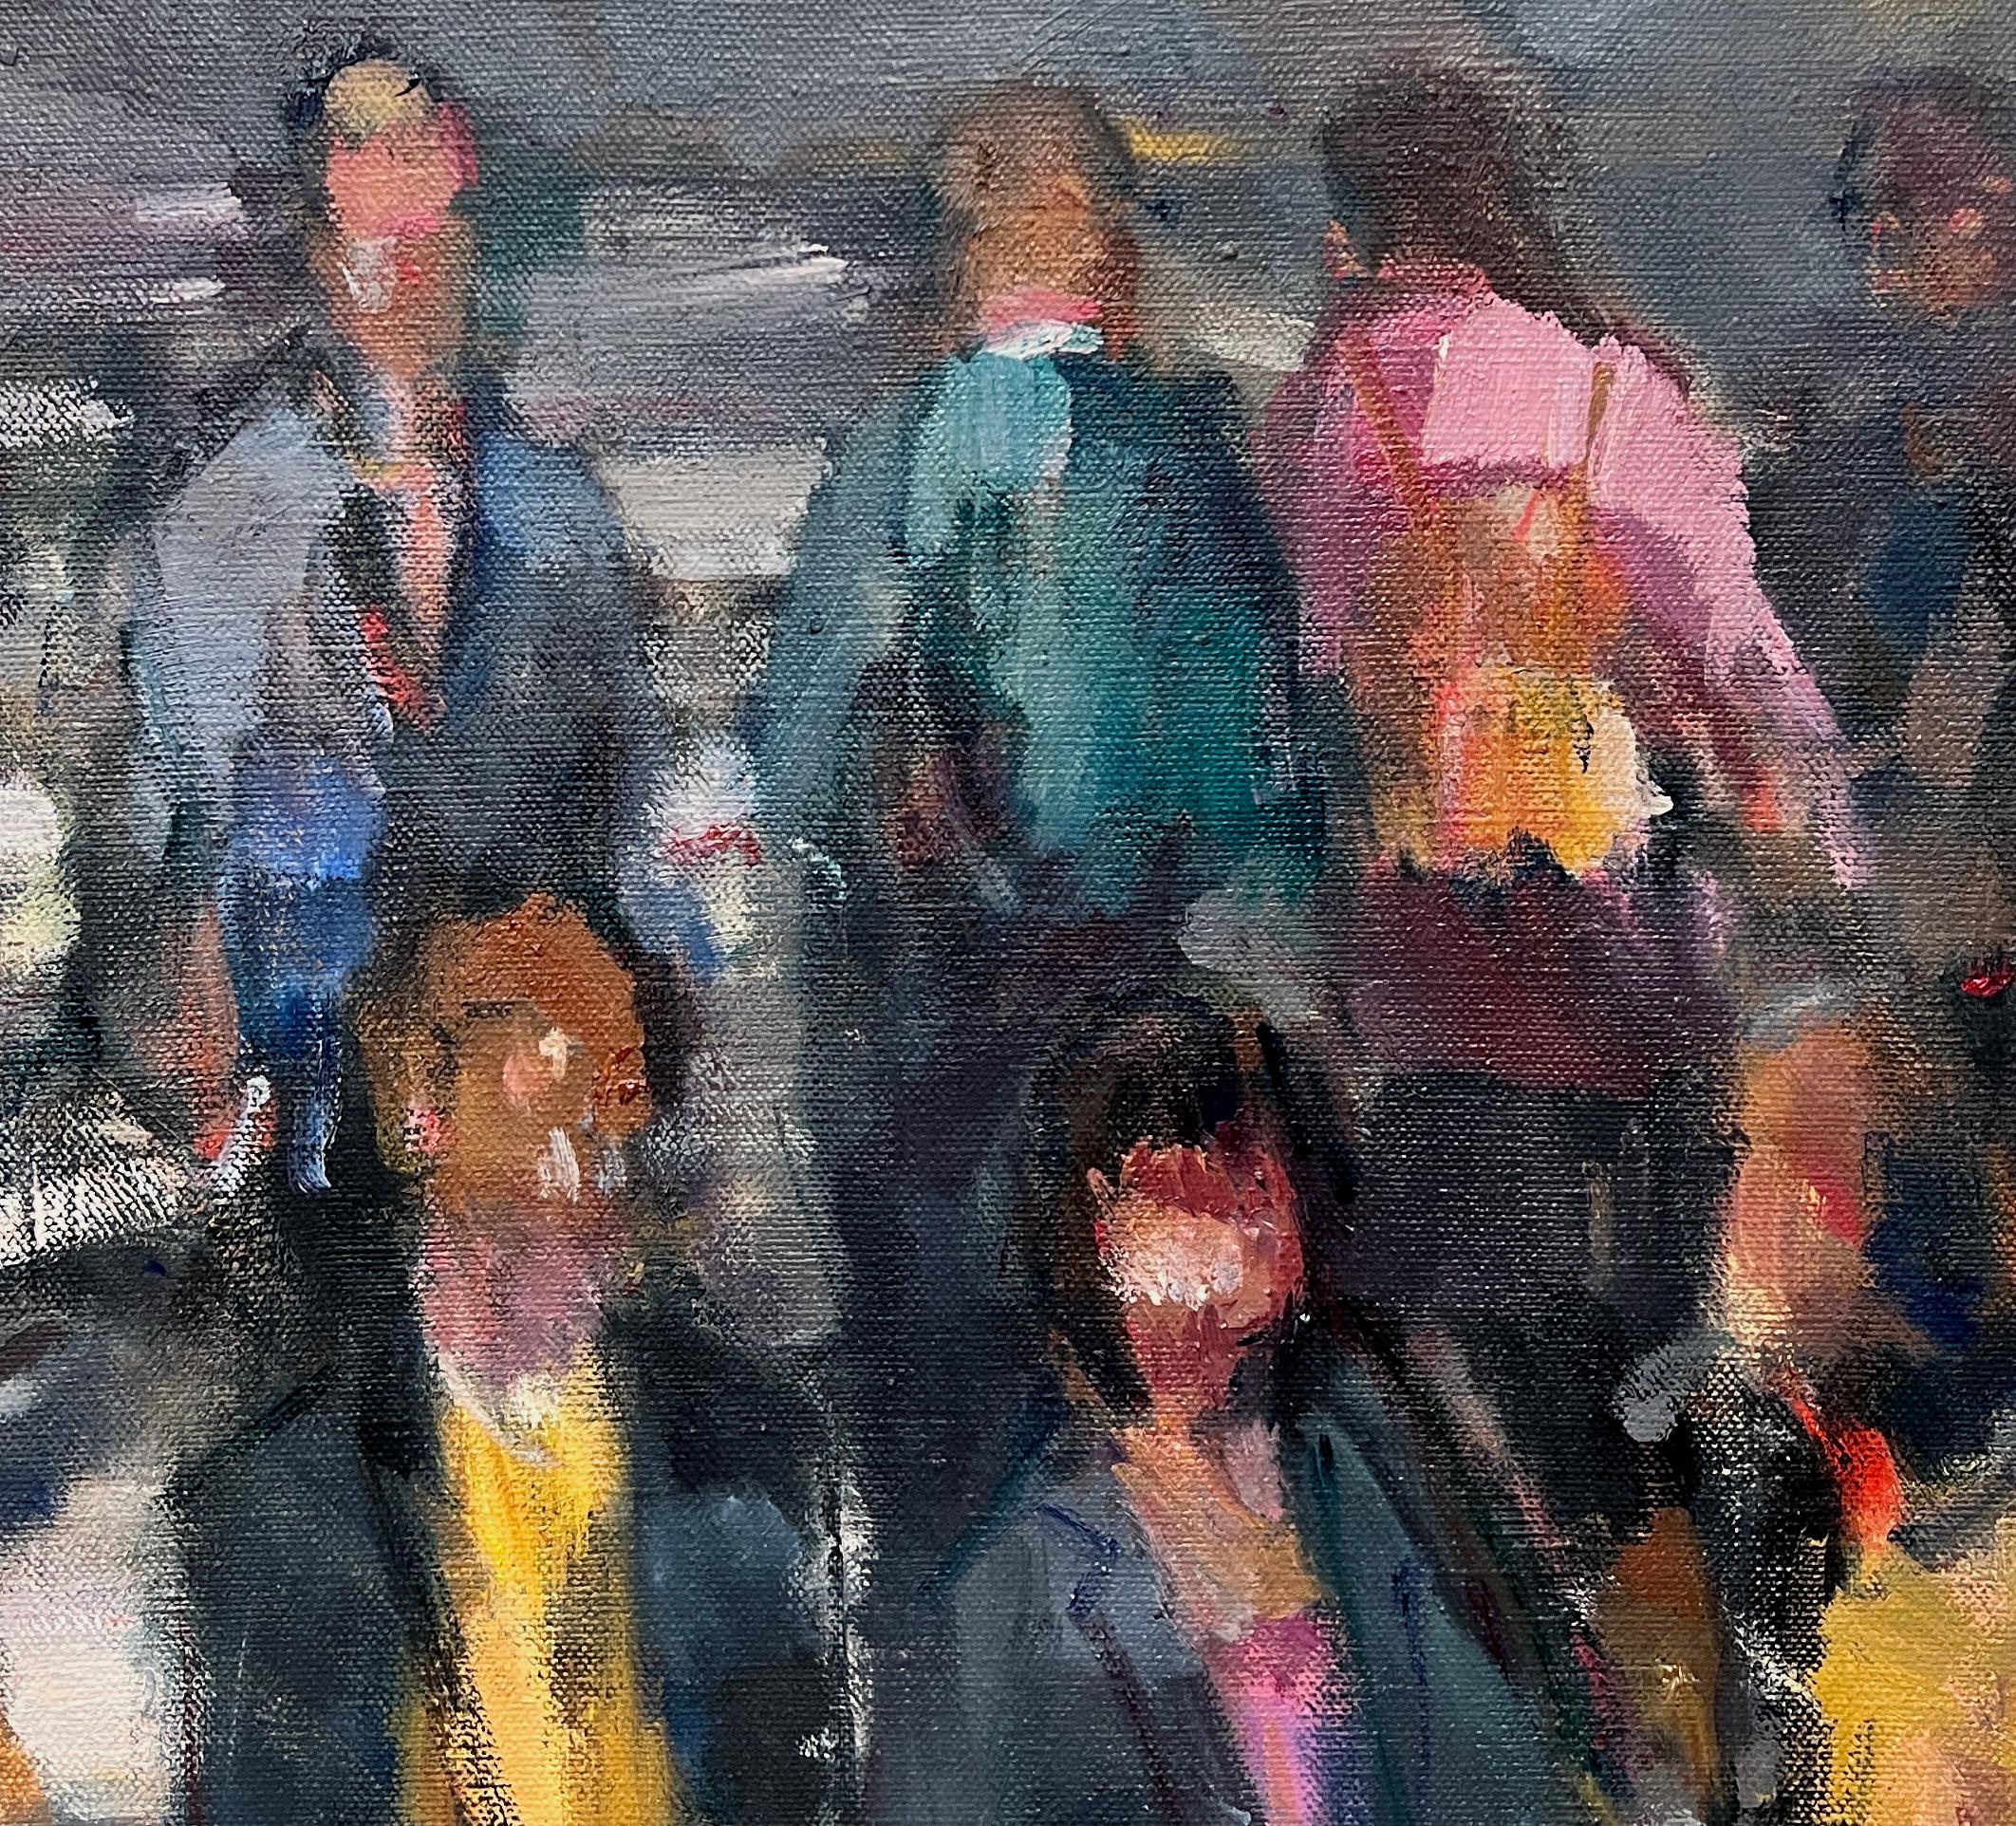 CROSSWALK, people crossing street, city, crowded street, oil paint, crowd - Contemporary Painting by Simon Nicholas